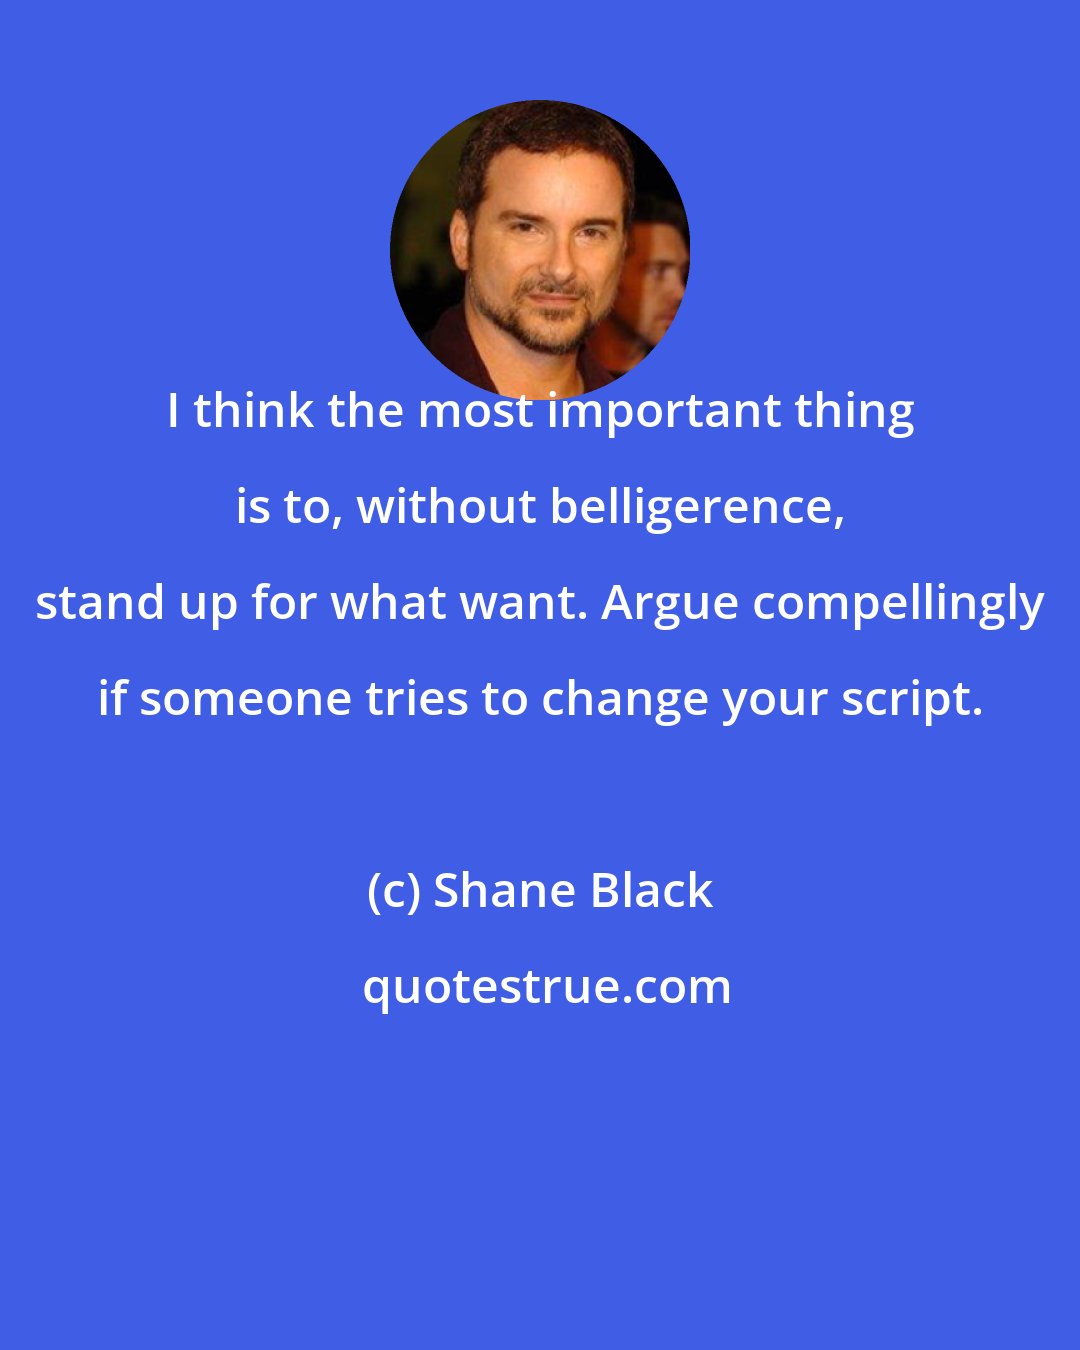 Shane Black: I think the most important thing is to, without belligerence, stand up for what want. Argue compellingly if someone tries to change your script.